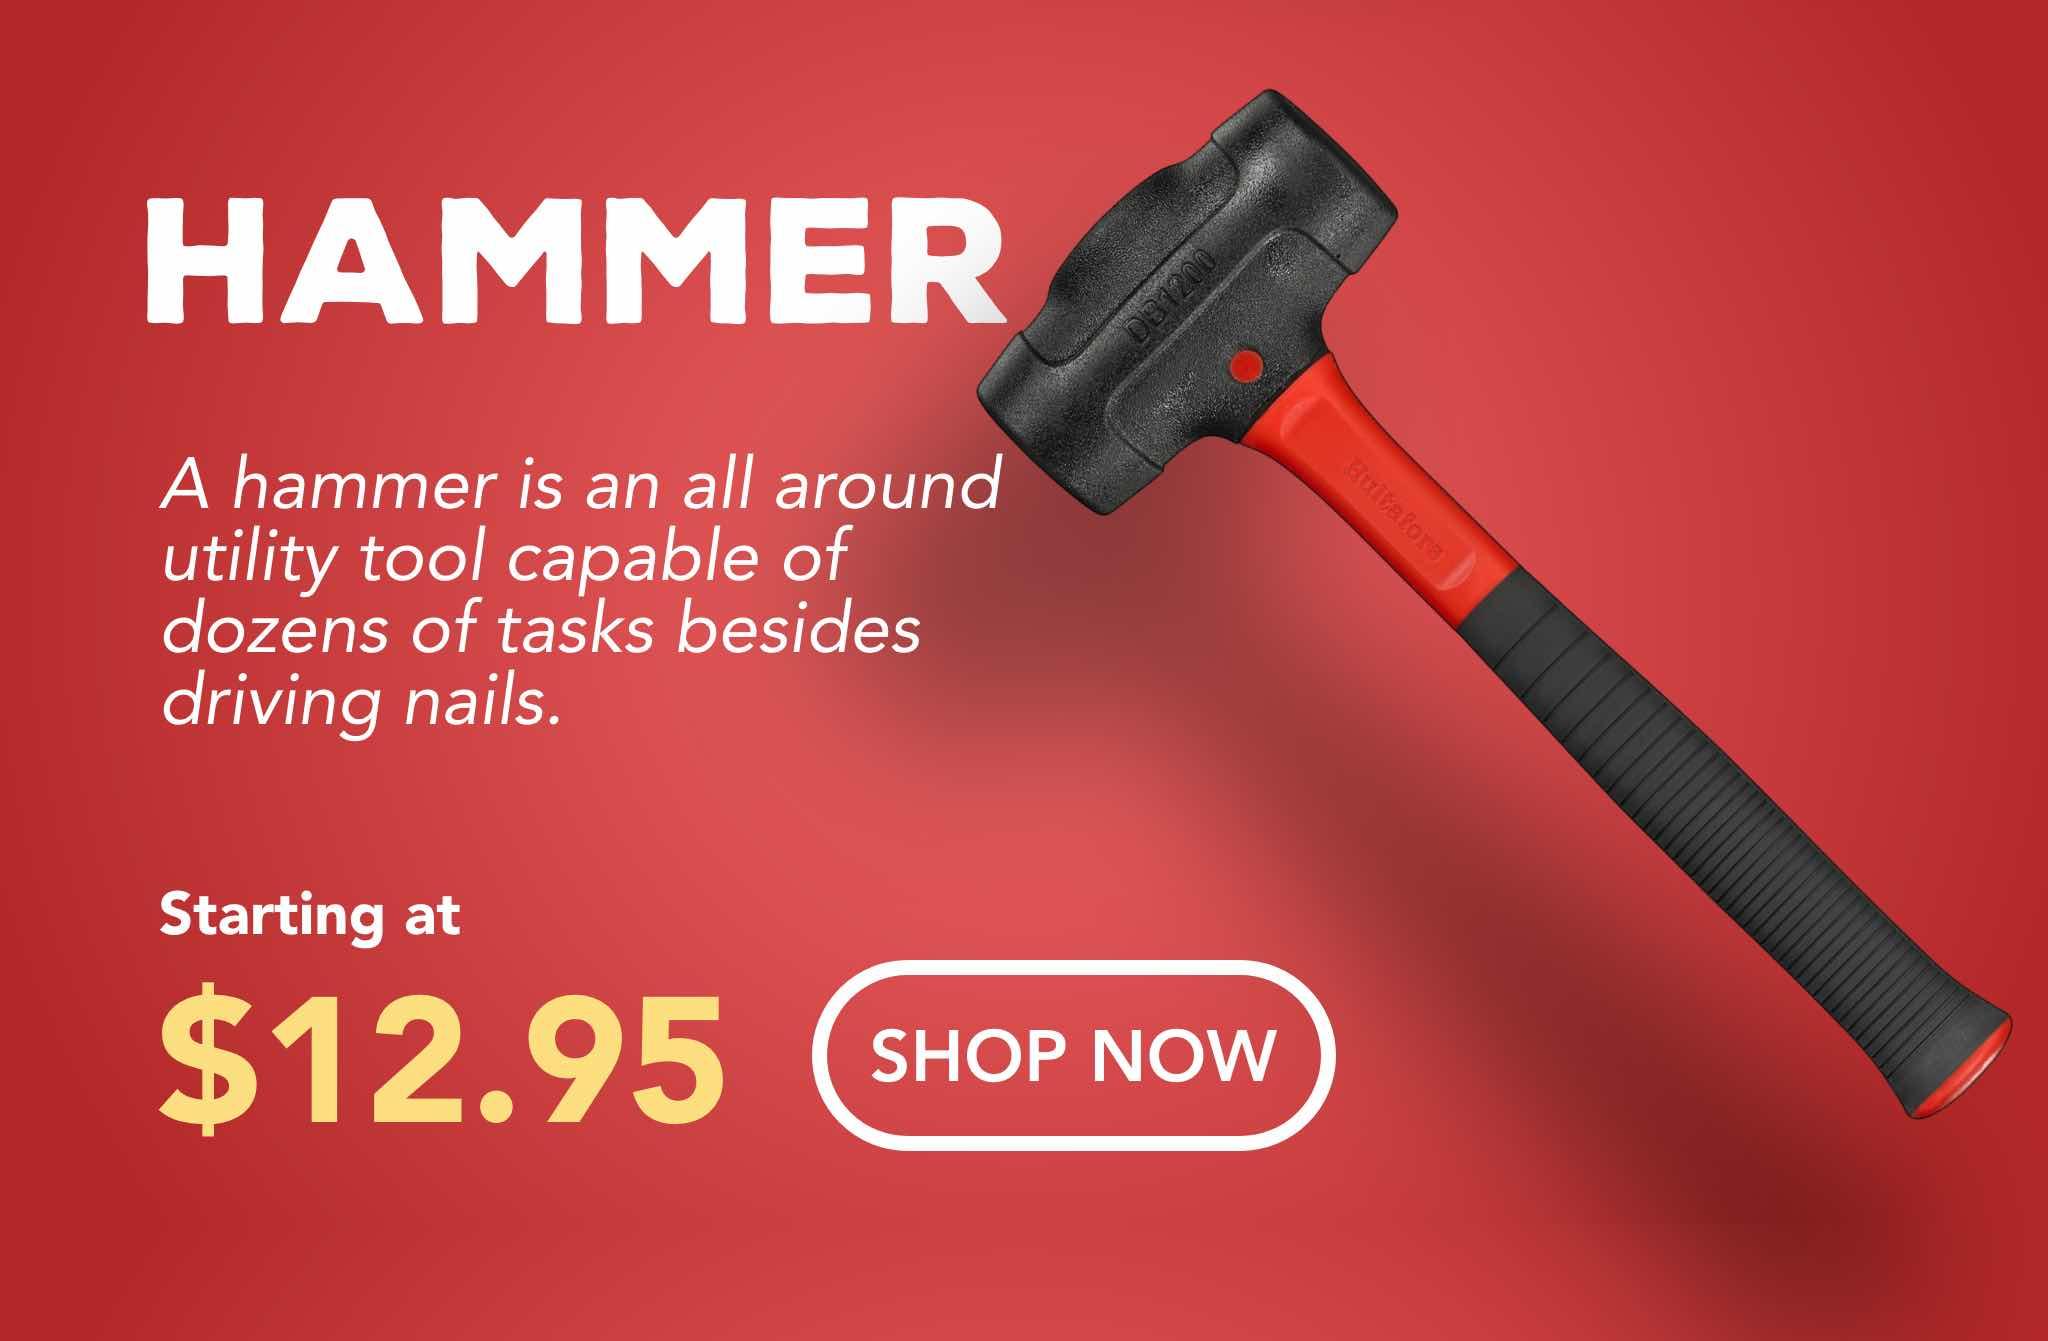 A hammer is an all around utility tool capable of dozens of tasks besides driving nails.